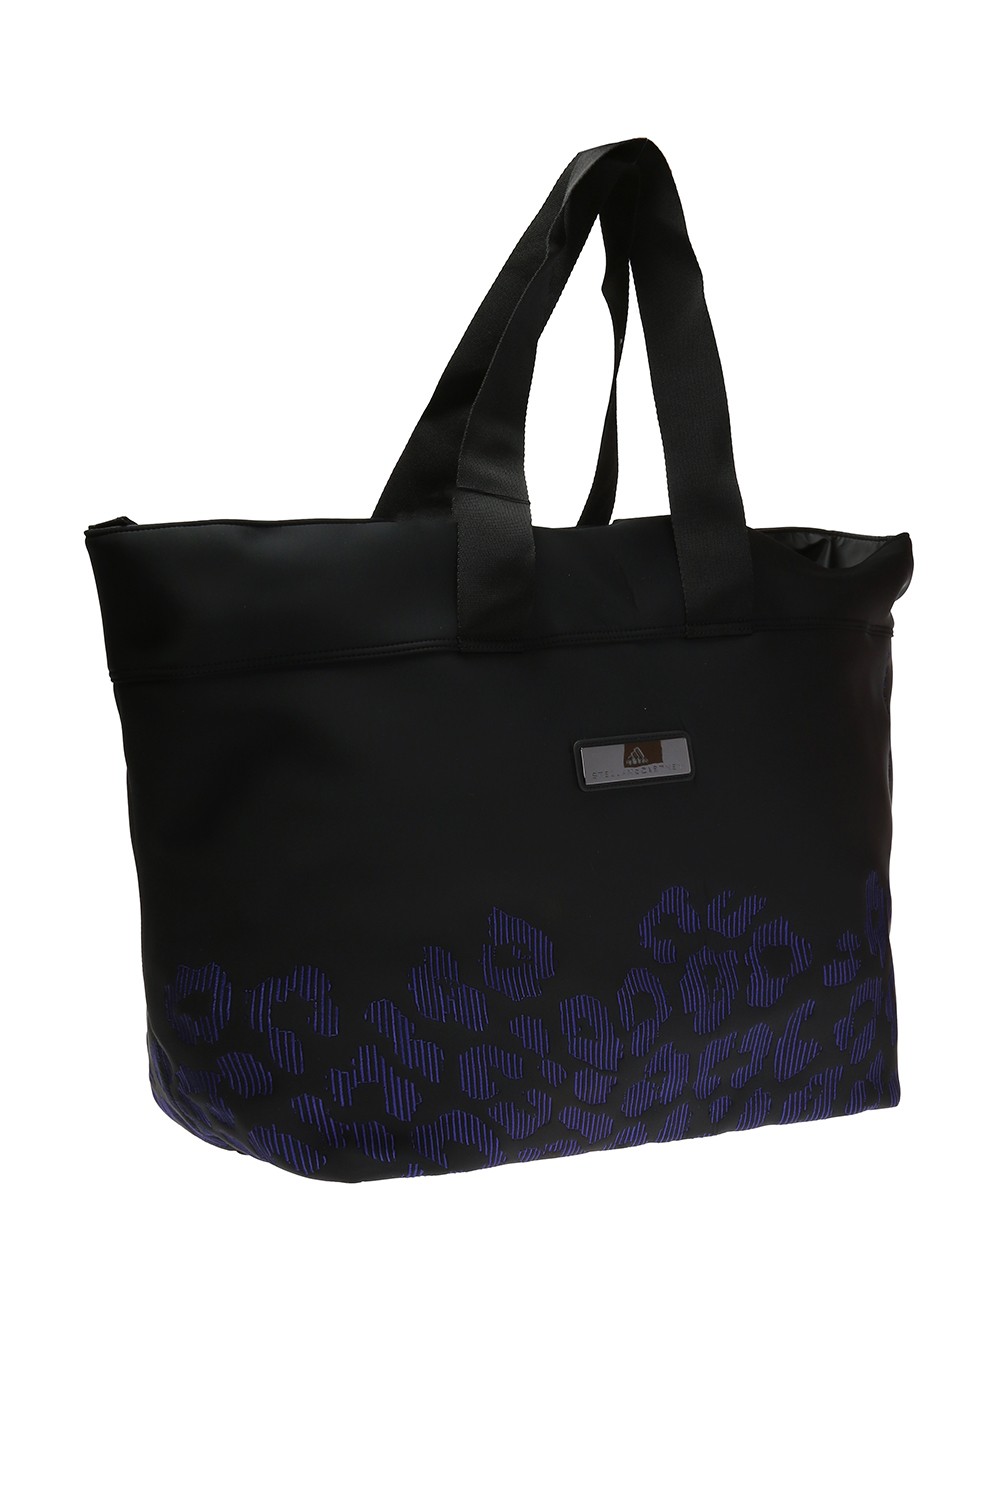 Lacoste: Black Embroidered Bag